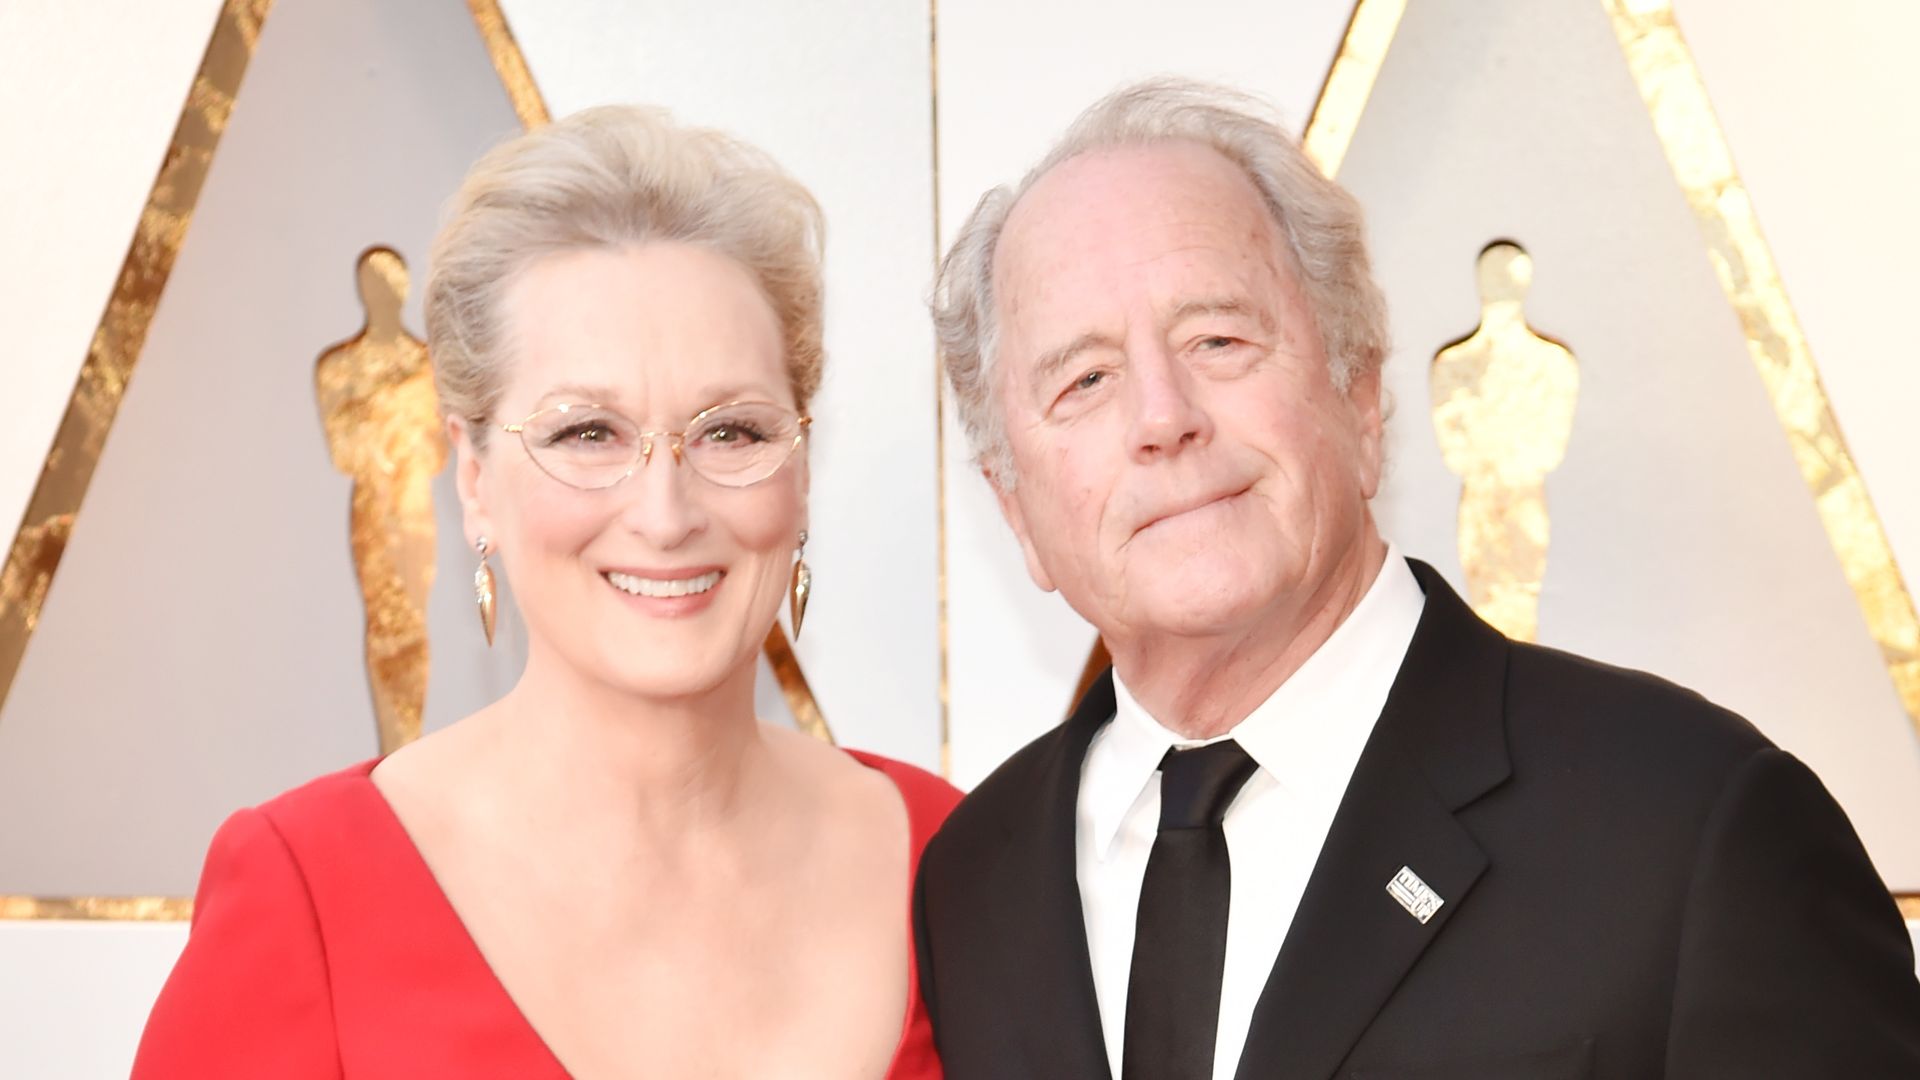 Meryl Streep and Don Gummer attend the 90th Annual Academy Awards at Hollywood & Highland Center on March 4, 2018 in Hollywood, California.